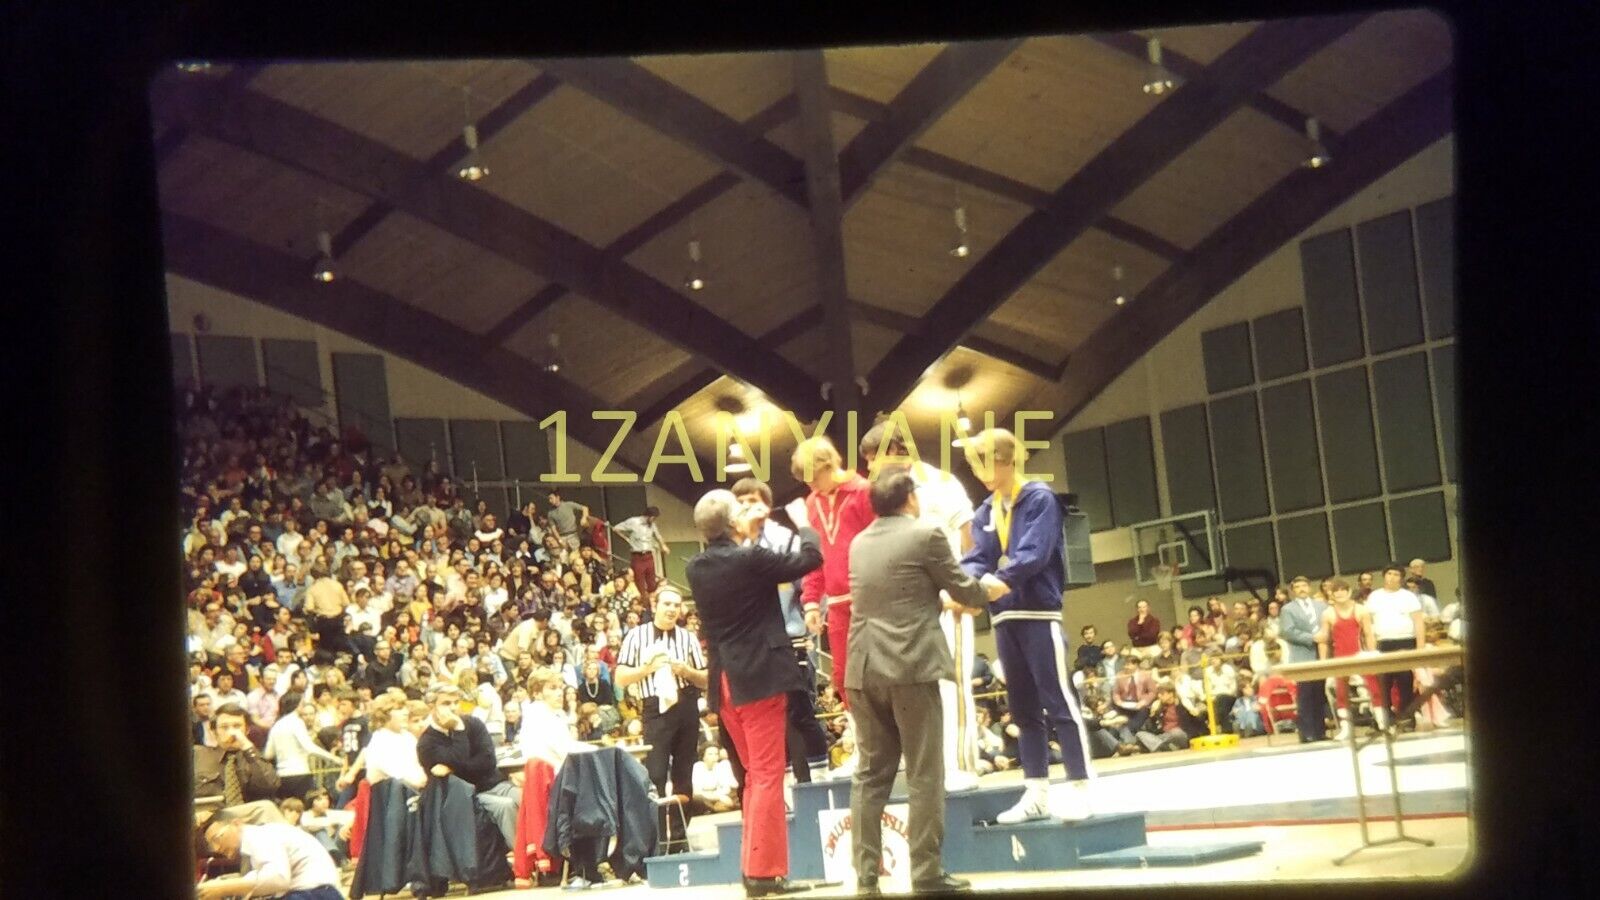 AO05 VINTAGE 35mm SLIDE Photo WRESTLERS GETTING MEDALS IN FRONT OF CROWDED GYM